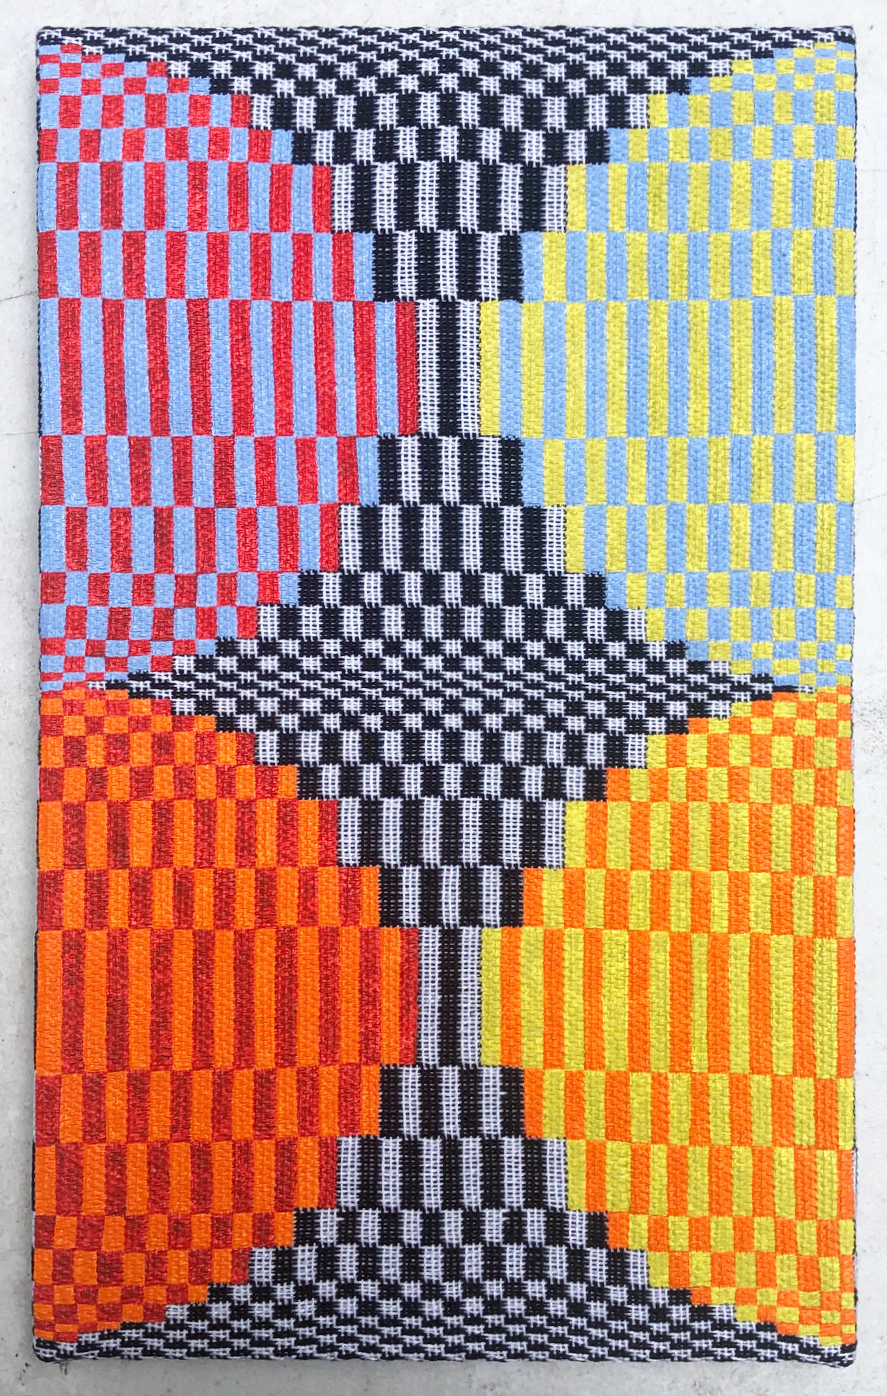 Untitled, 2021, acyrlic on hand-woven textile, 20 x 12 inches.